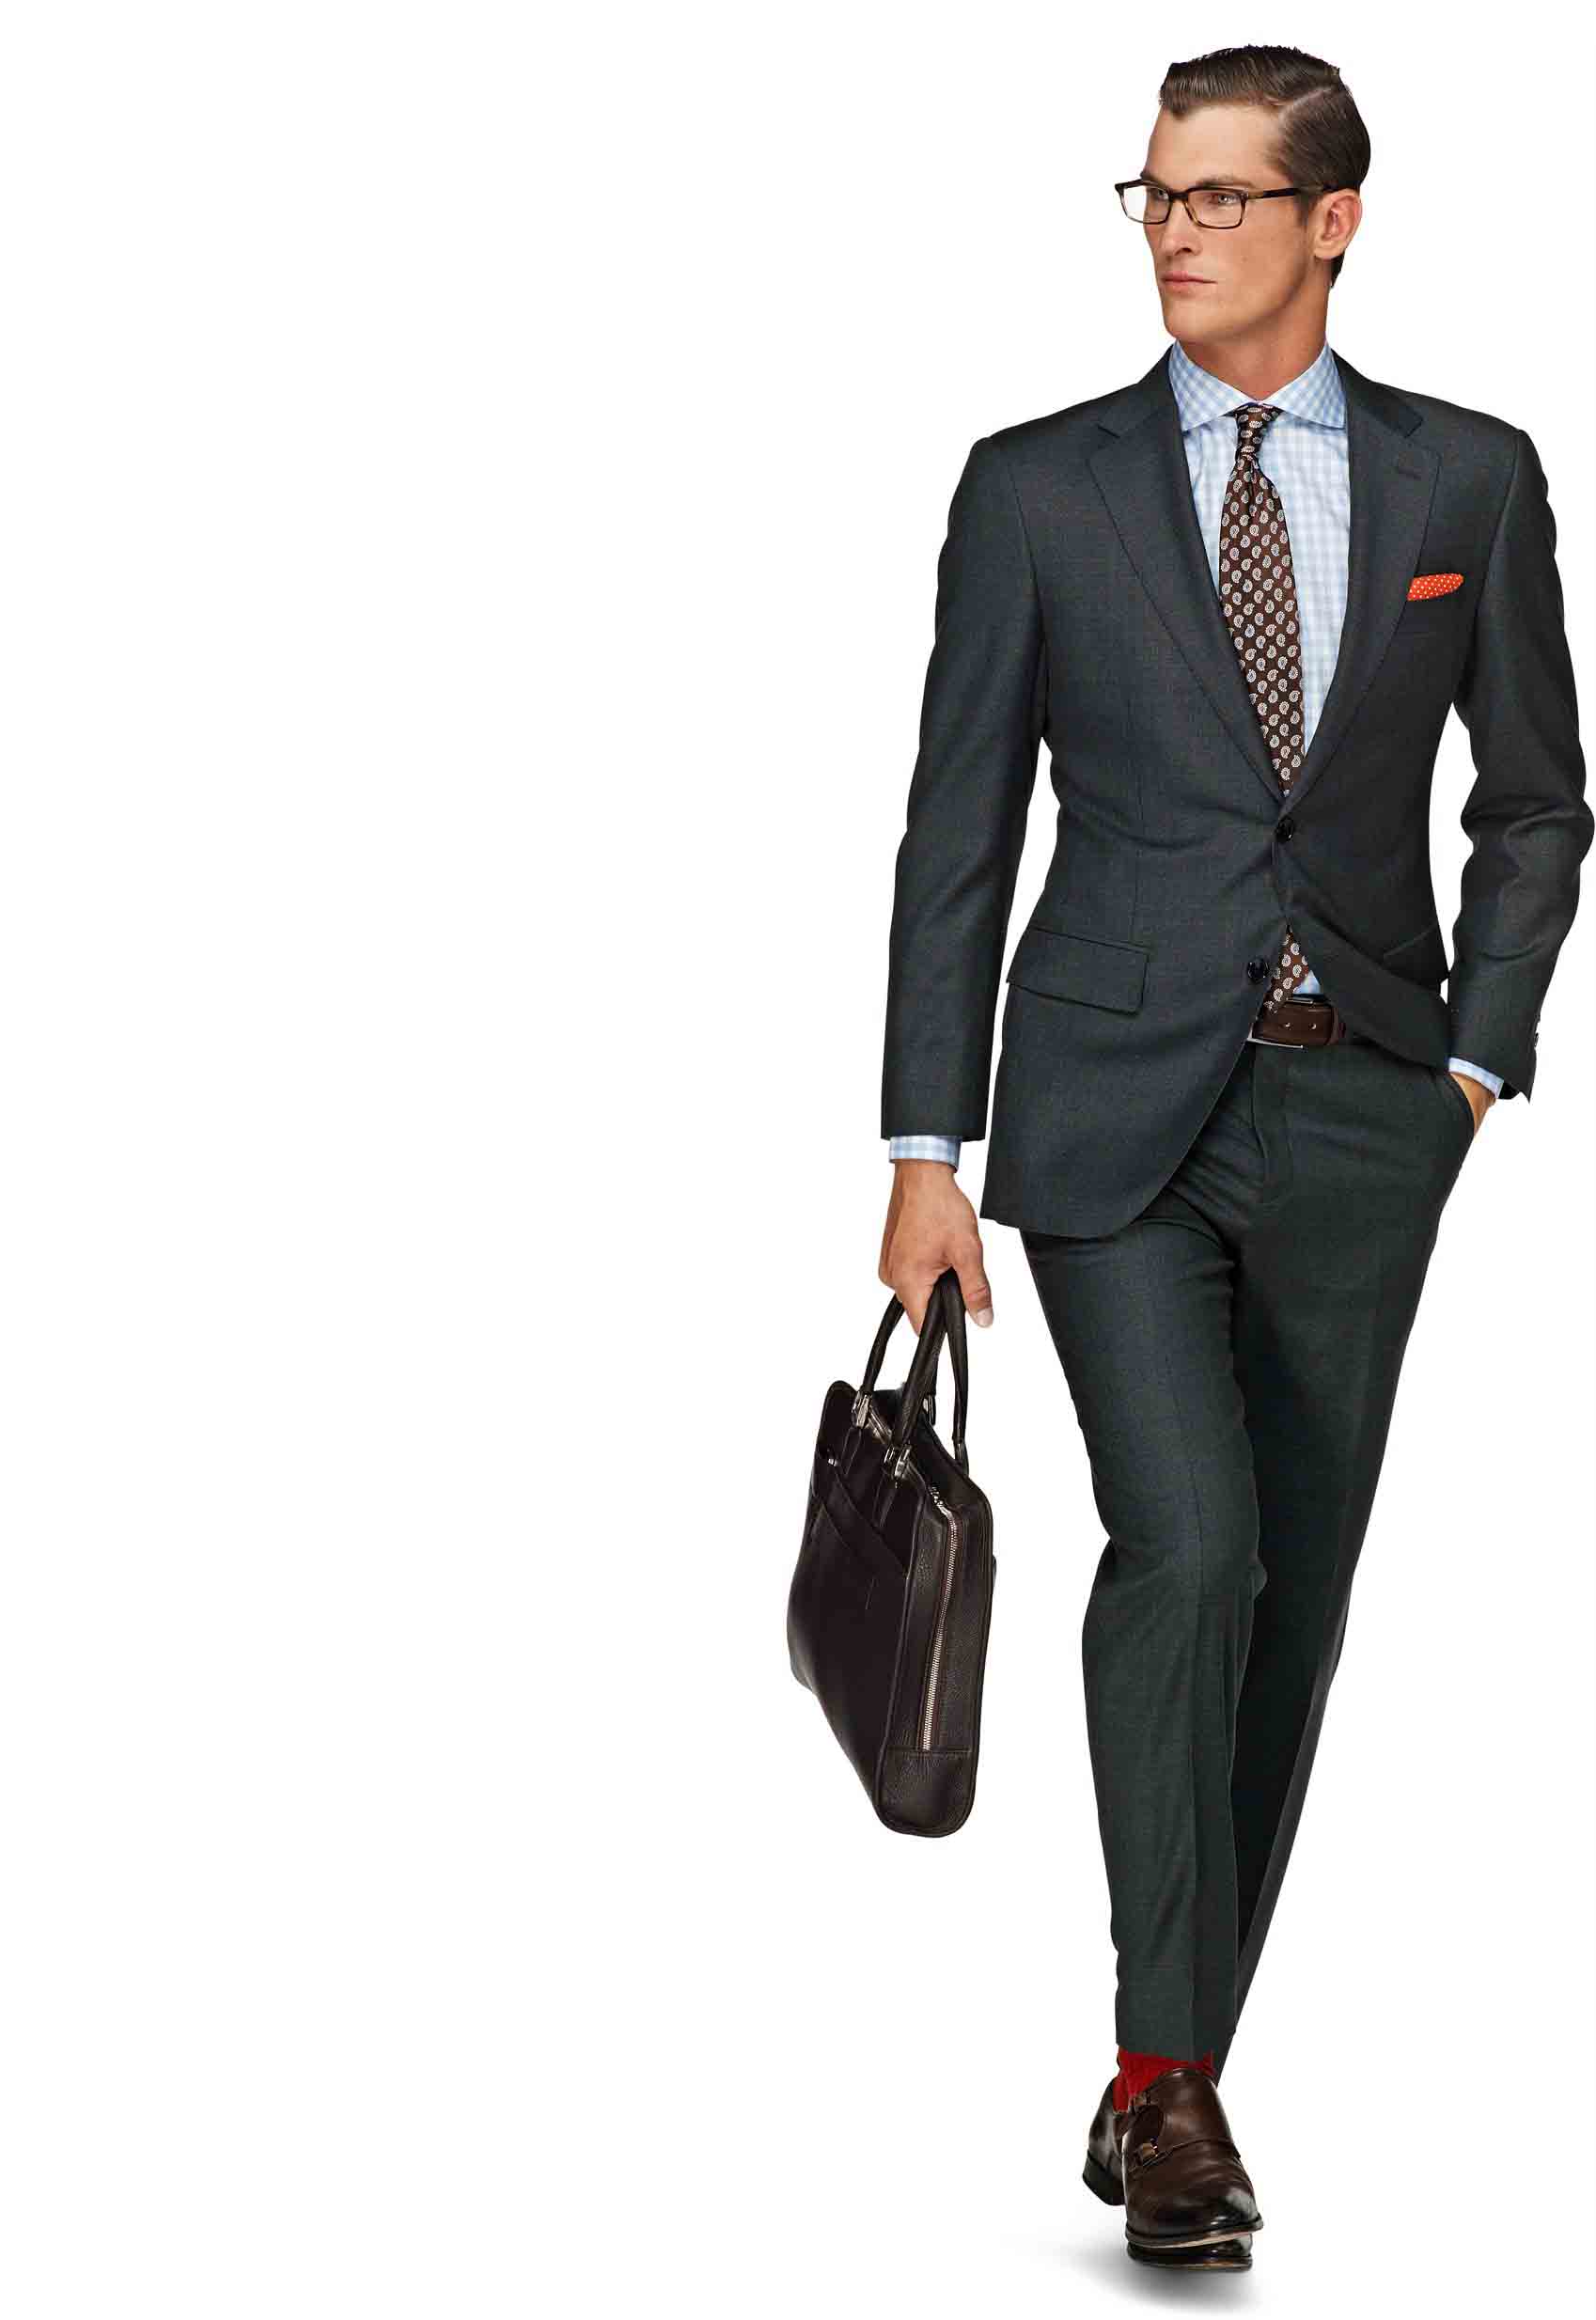 Much Ado About Men's Suits - ZeusFactor